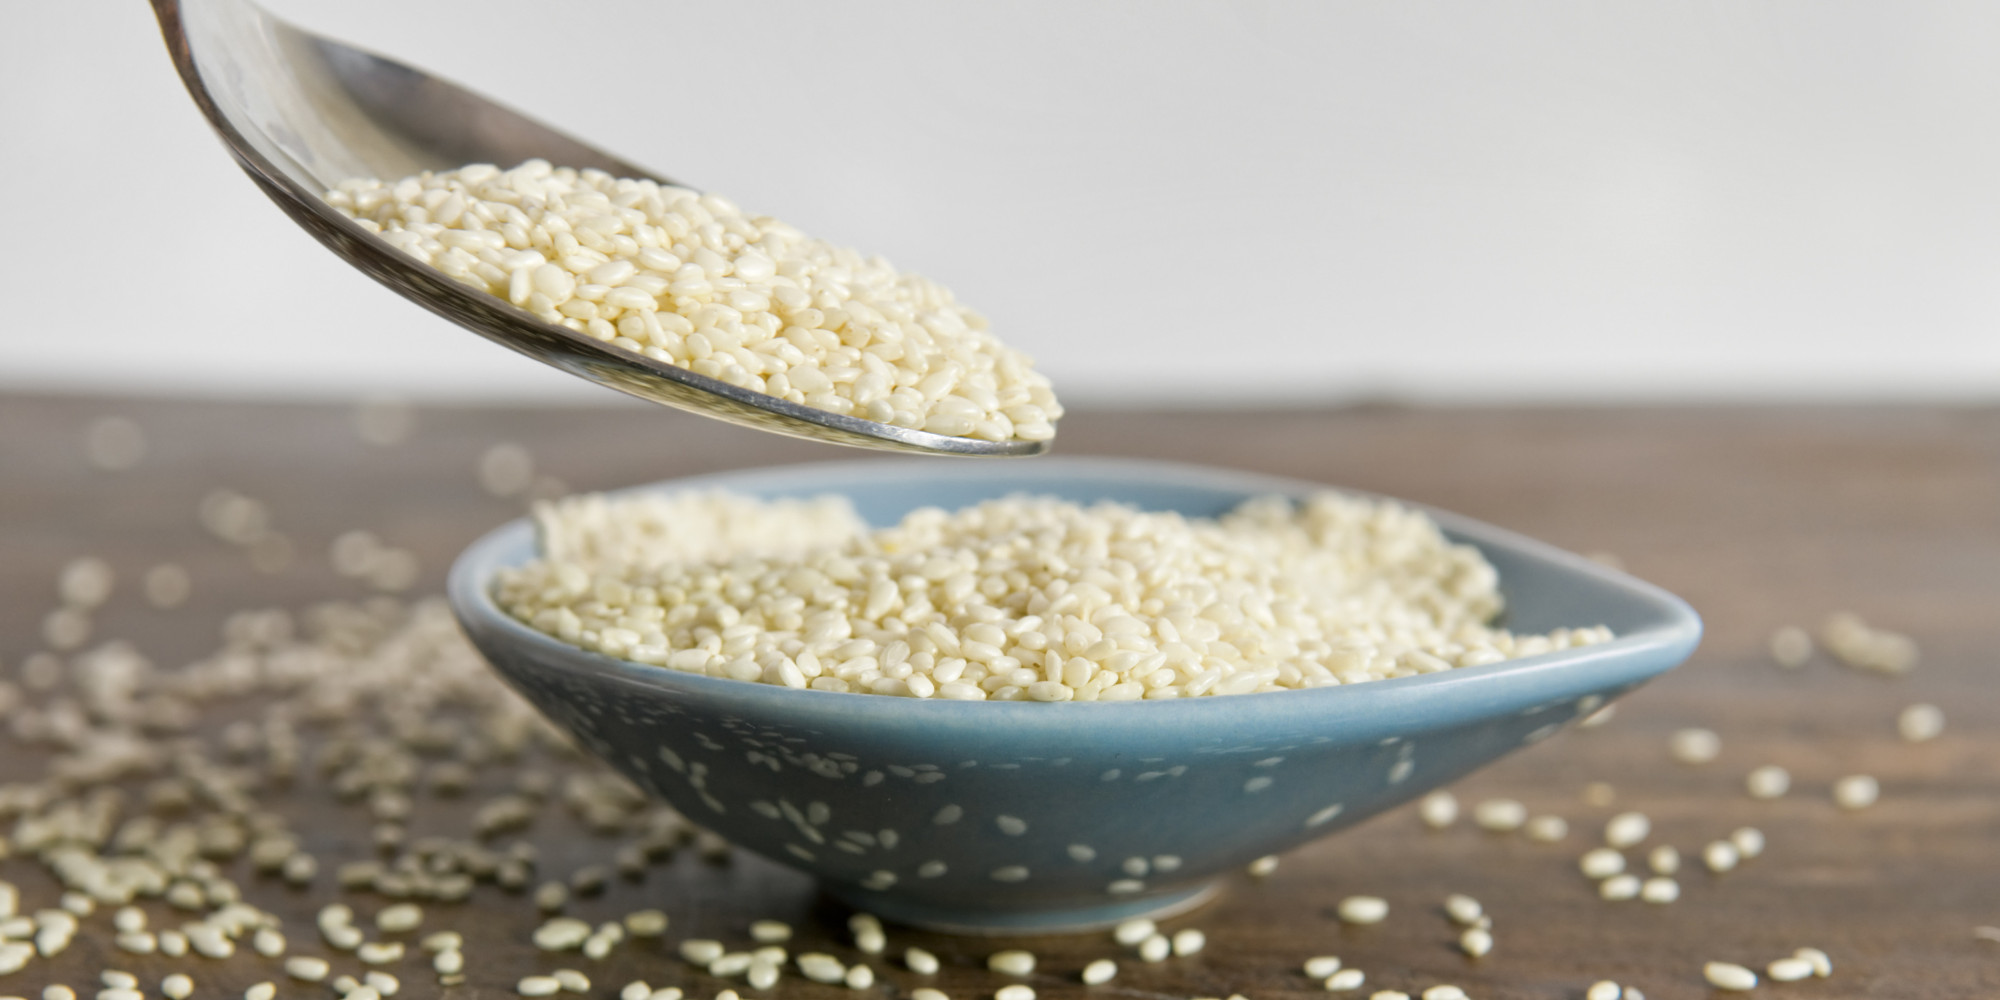 Image: Sesame seeds may relieve liver damage caused by modern drugs